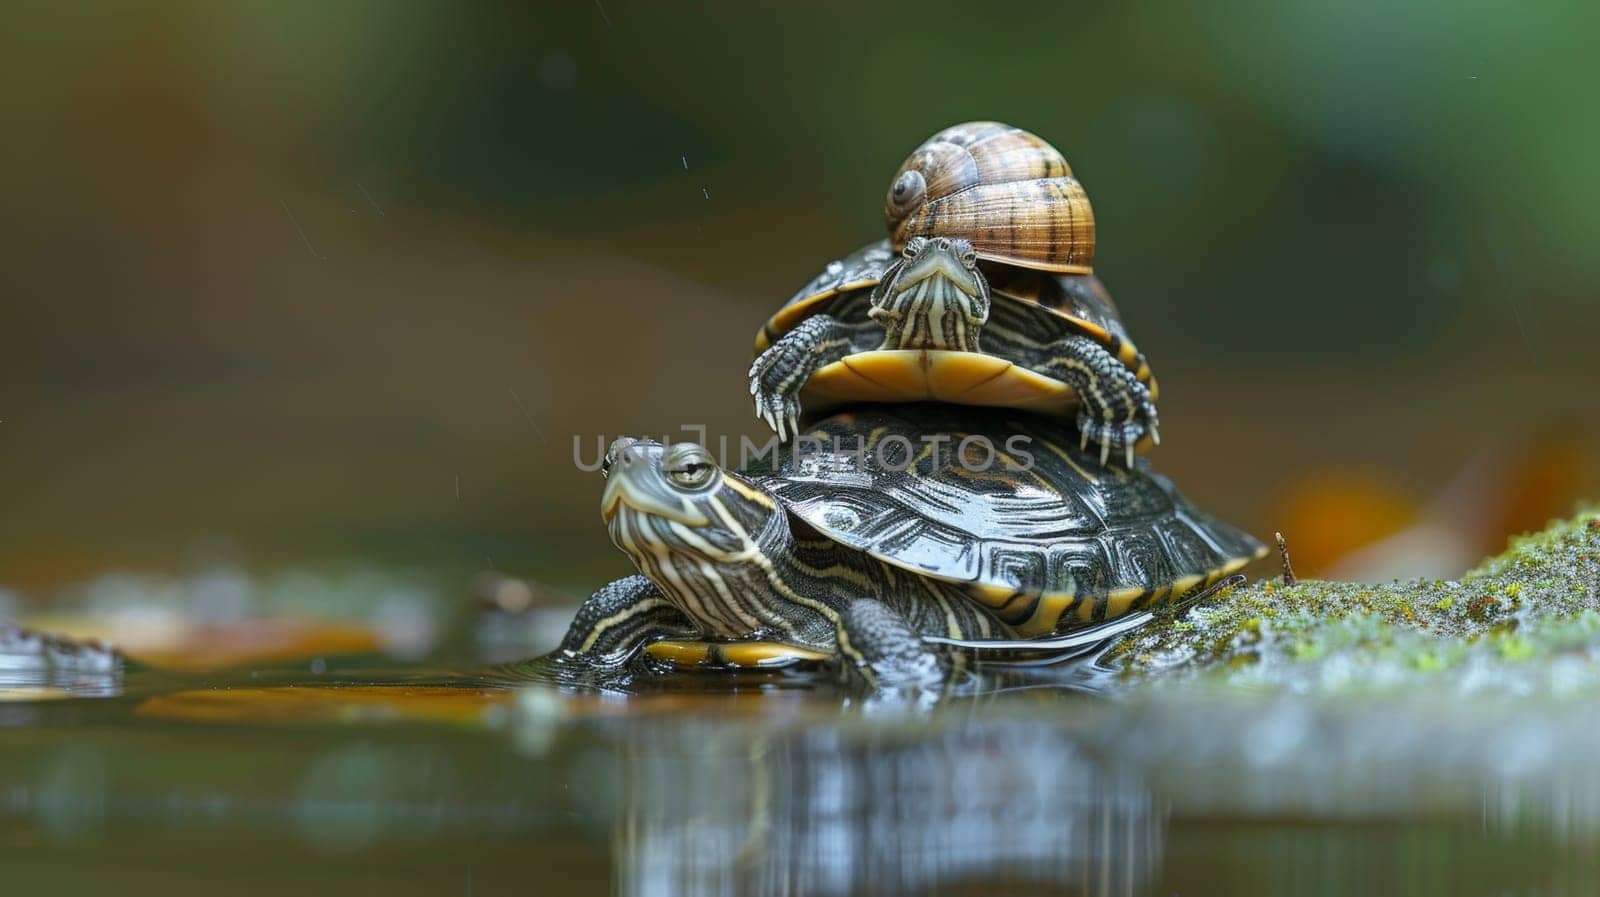 Two turtles are sitting on top of each other in the water